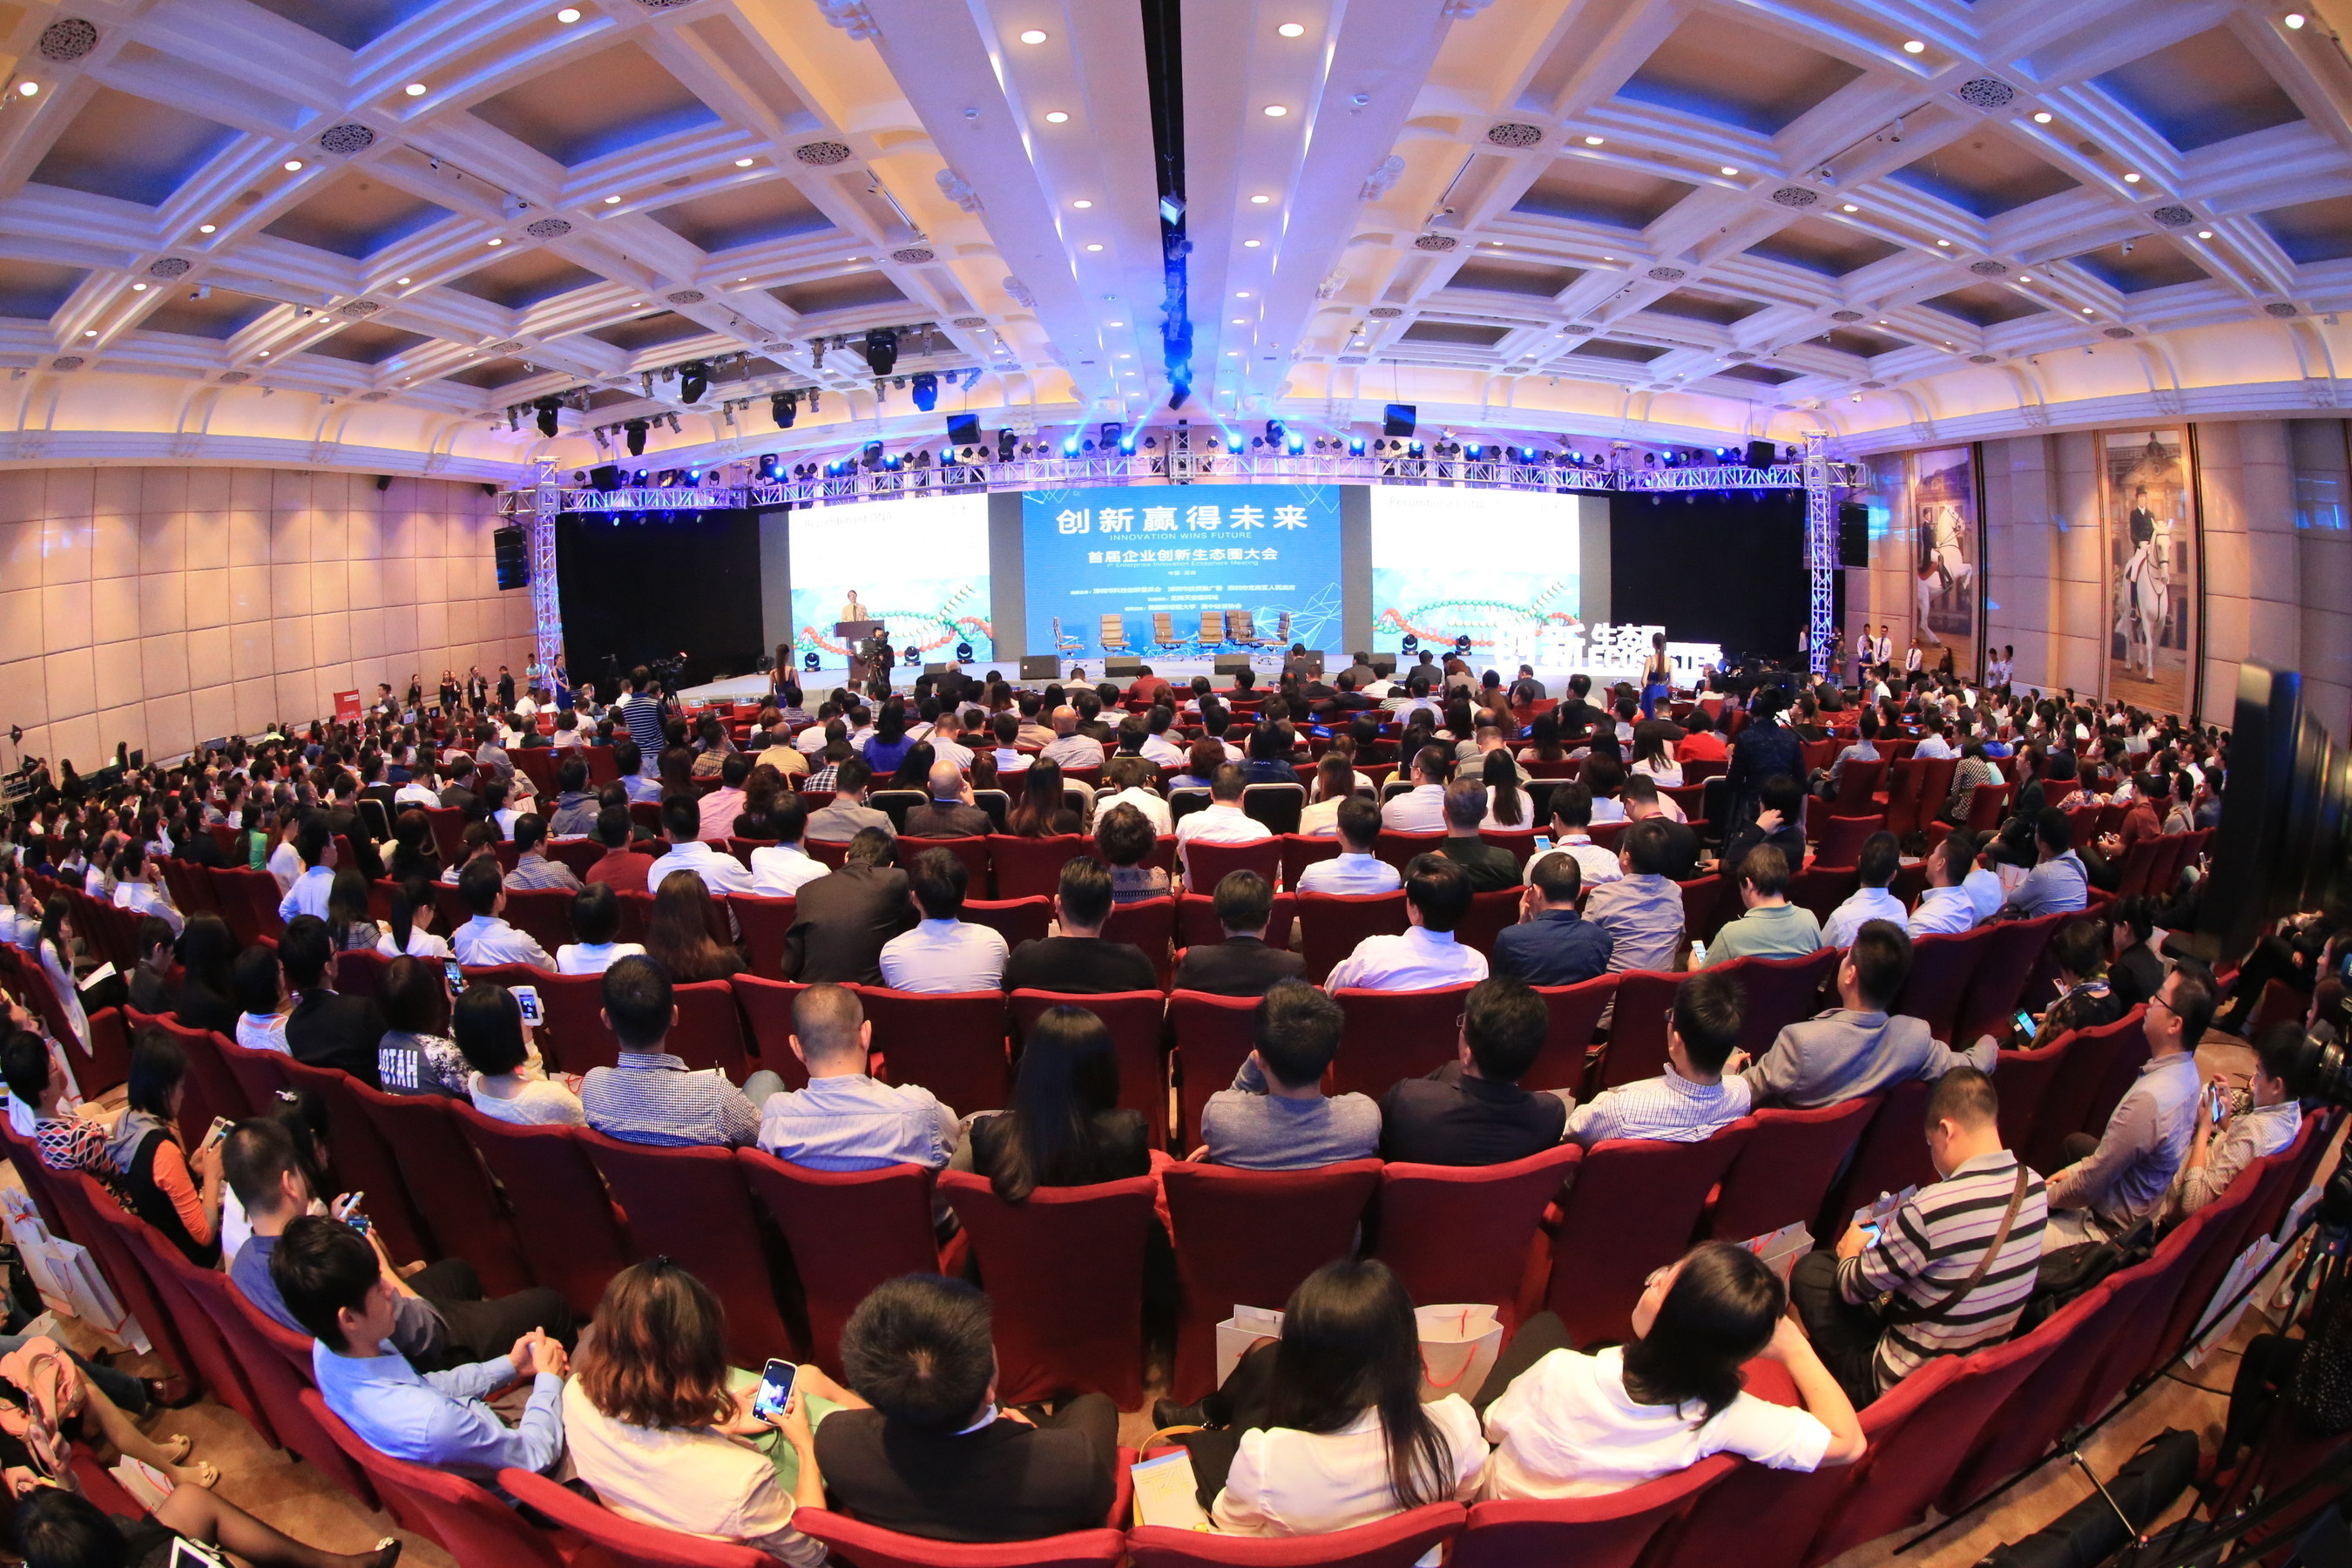 A presentation conference for Shenzhen Longgang District Innovation Environment's and Tian'an Cyber Park's Silicon Valley Express Exchange Conference was officially held in Shenzhen on November 4th